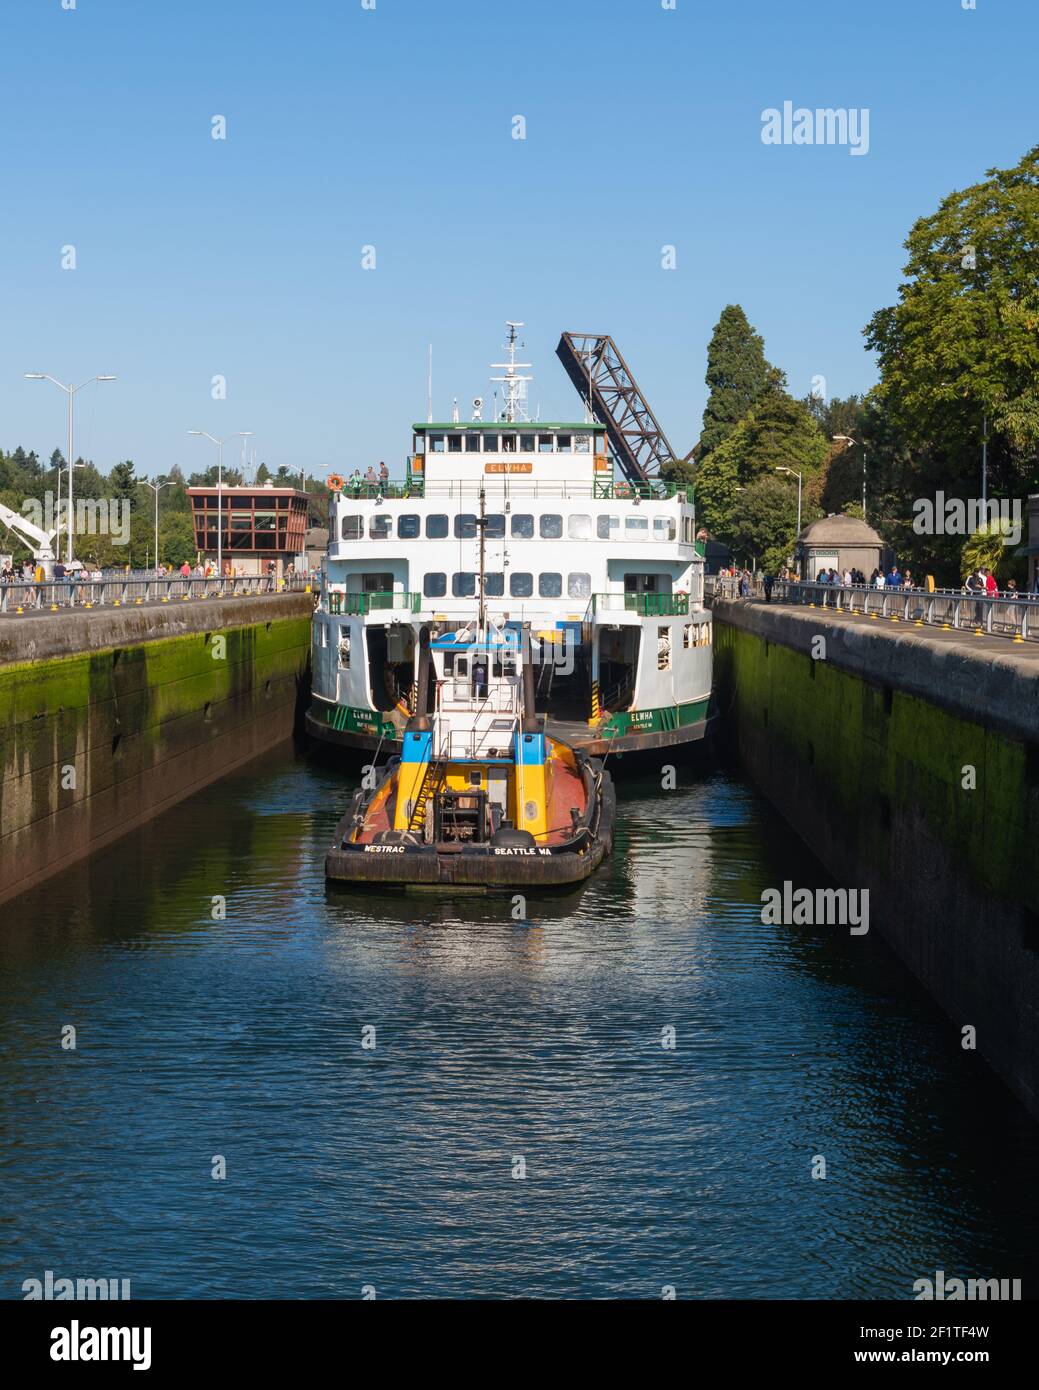 In preparation for maintenance the Washington State Ferry Elwha passes through the Ballard locks under tow of the tugboat Westrac Stock Photo